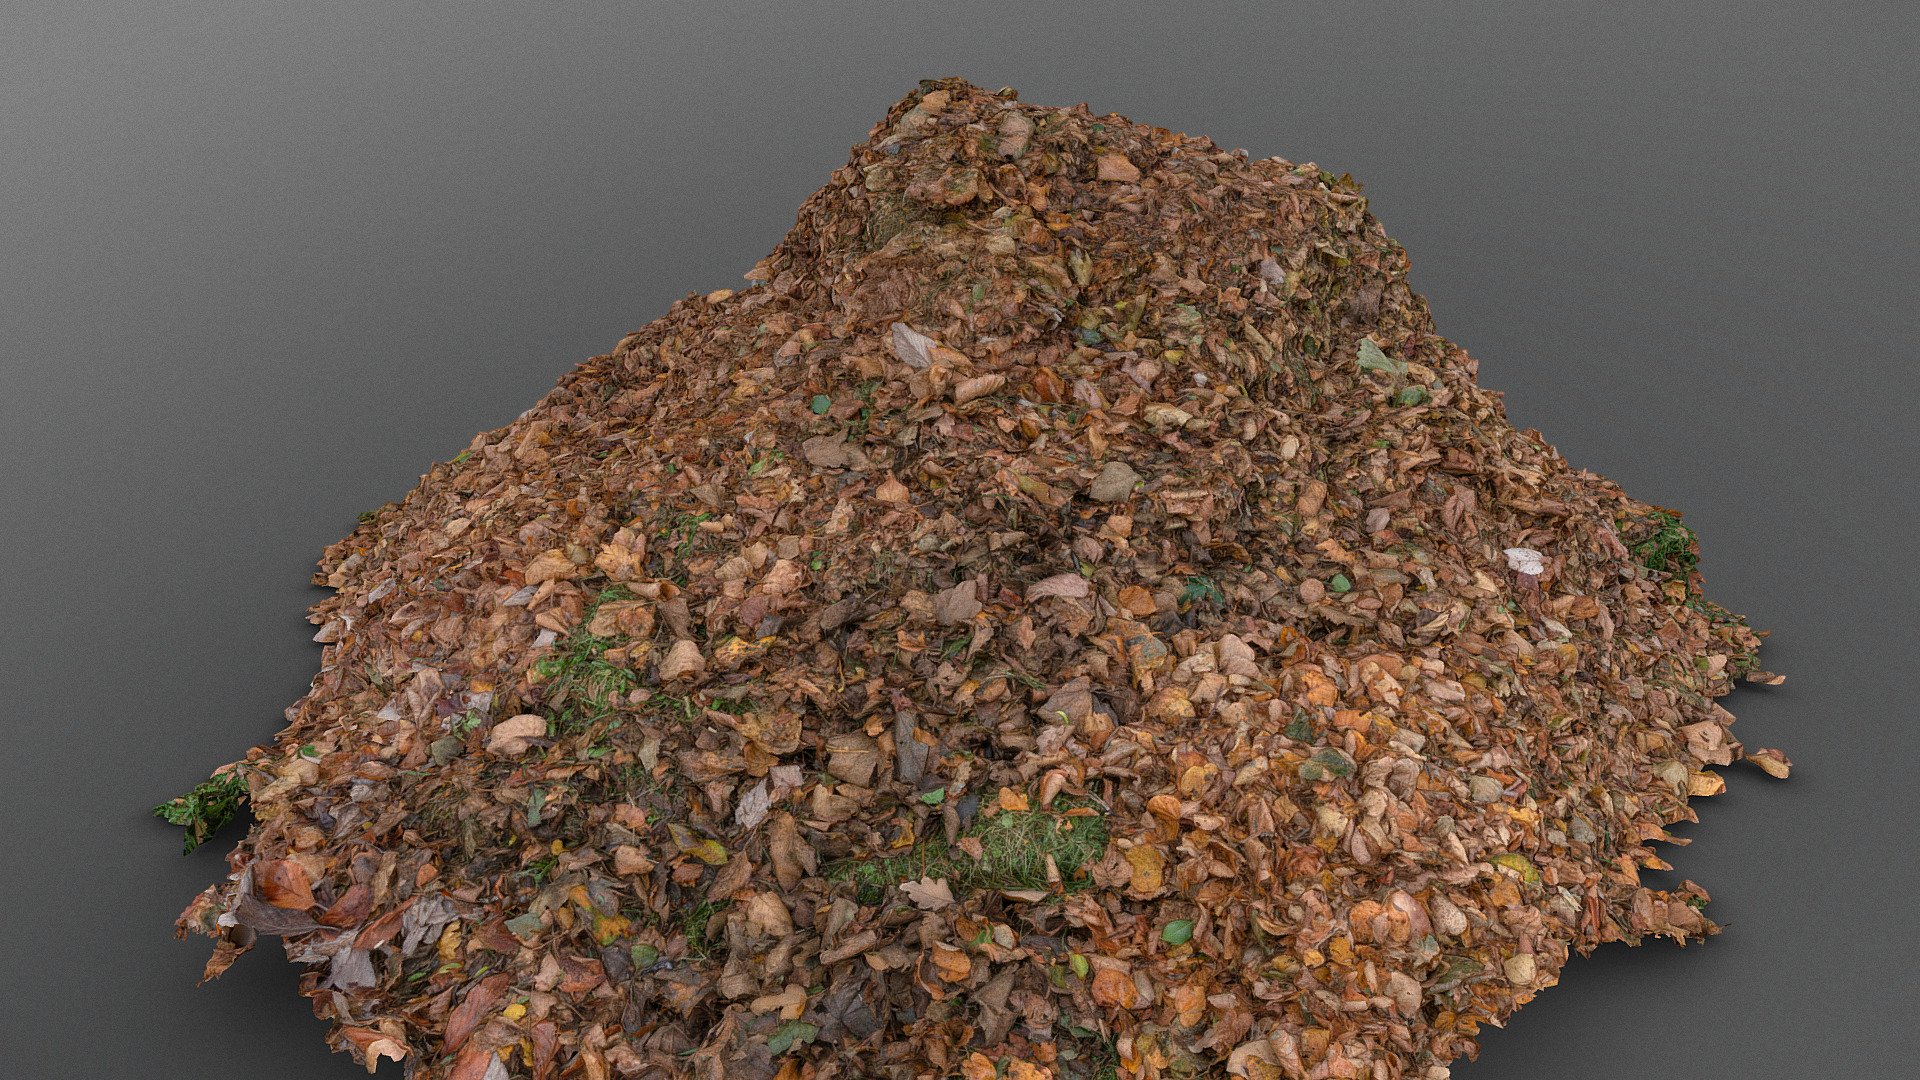 Fallen Leaves heap pile in garden park of autumn fall lime lindens tree leaf, on garden park grass

Raw Photogrammetry scan 120x24MP, 3x16K textures + HD normals - Large pile of leaves - Download Free 3D model by matousekfoto 3d model